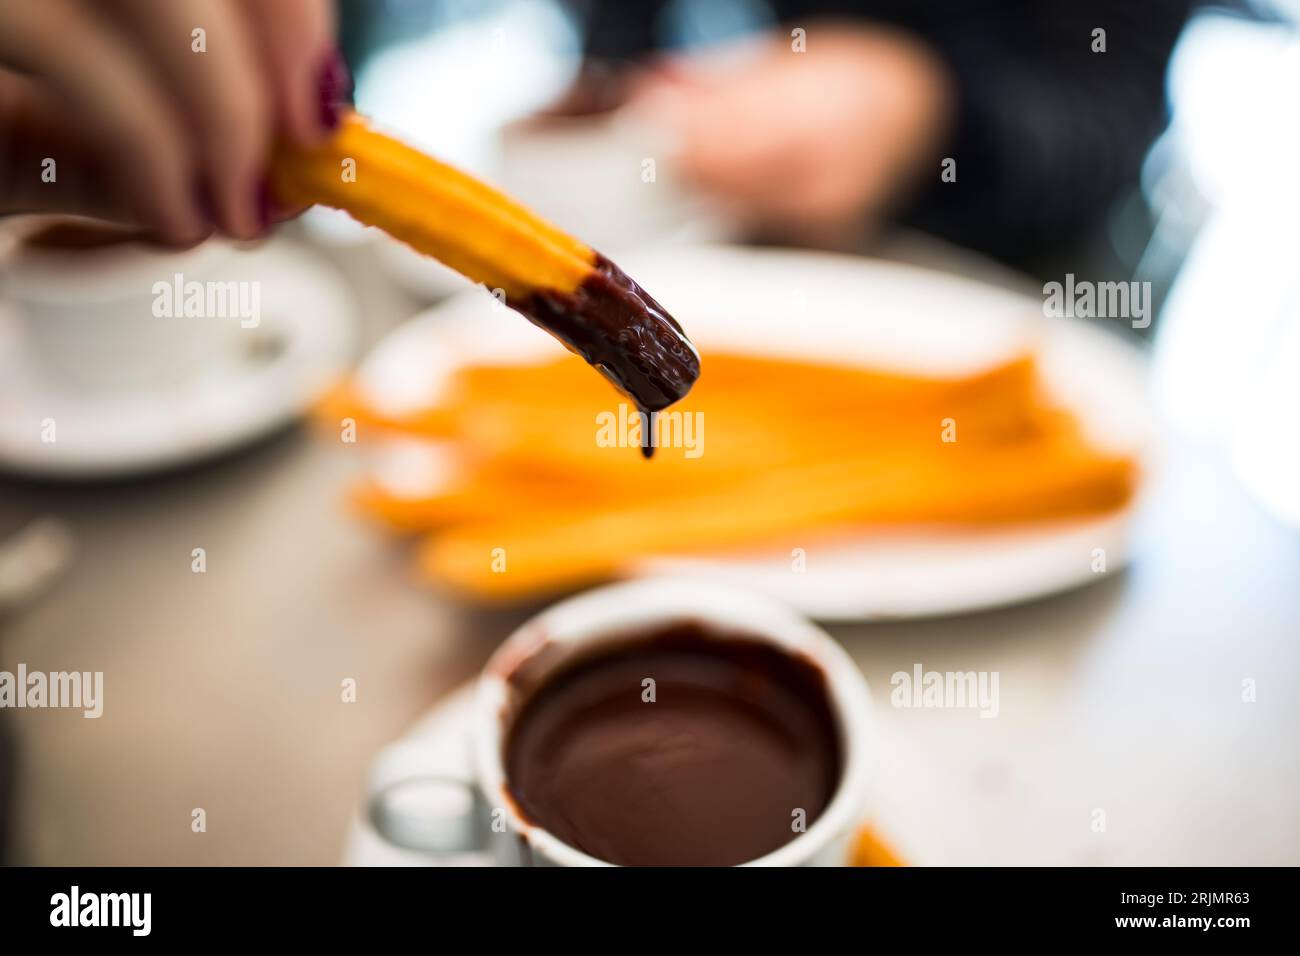 Eating Churros in Madrid, Spain dipped in chocolate, delicatessen, cuisine, fine dining experience, cultural, local food Stock Photo